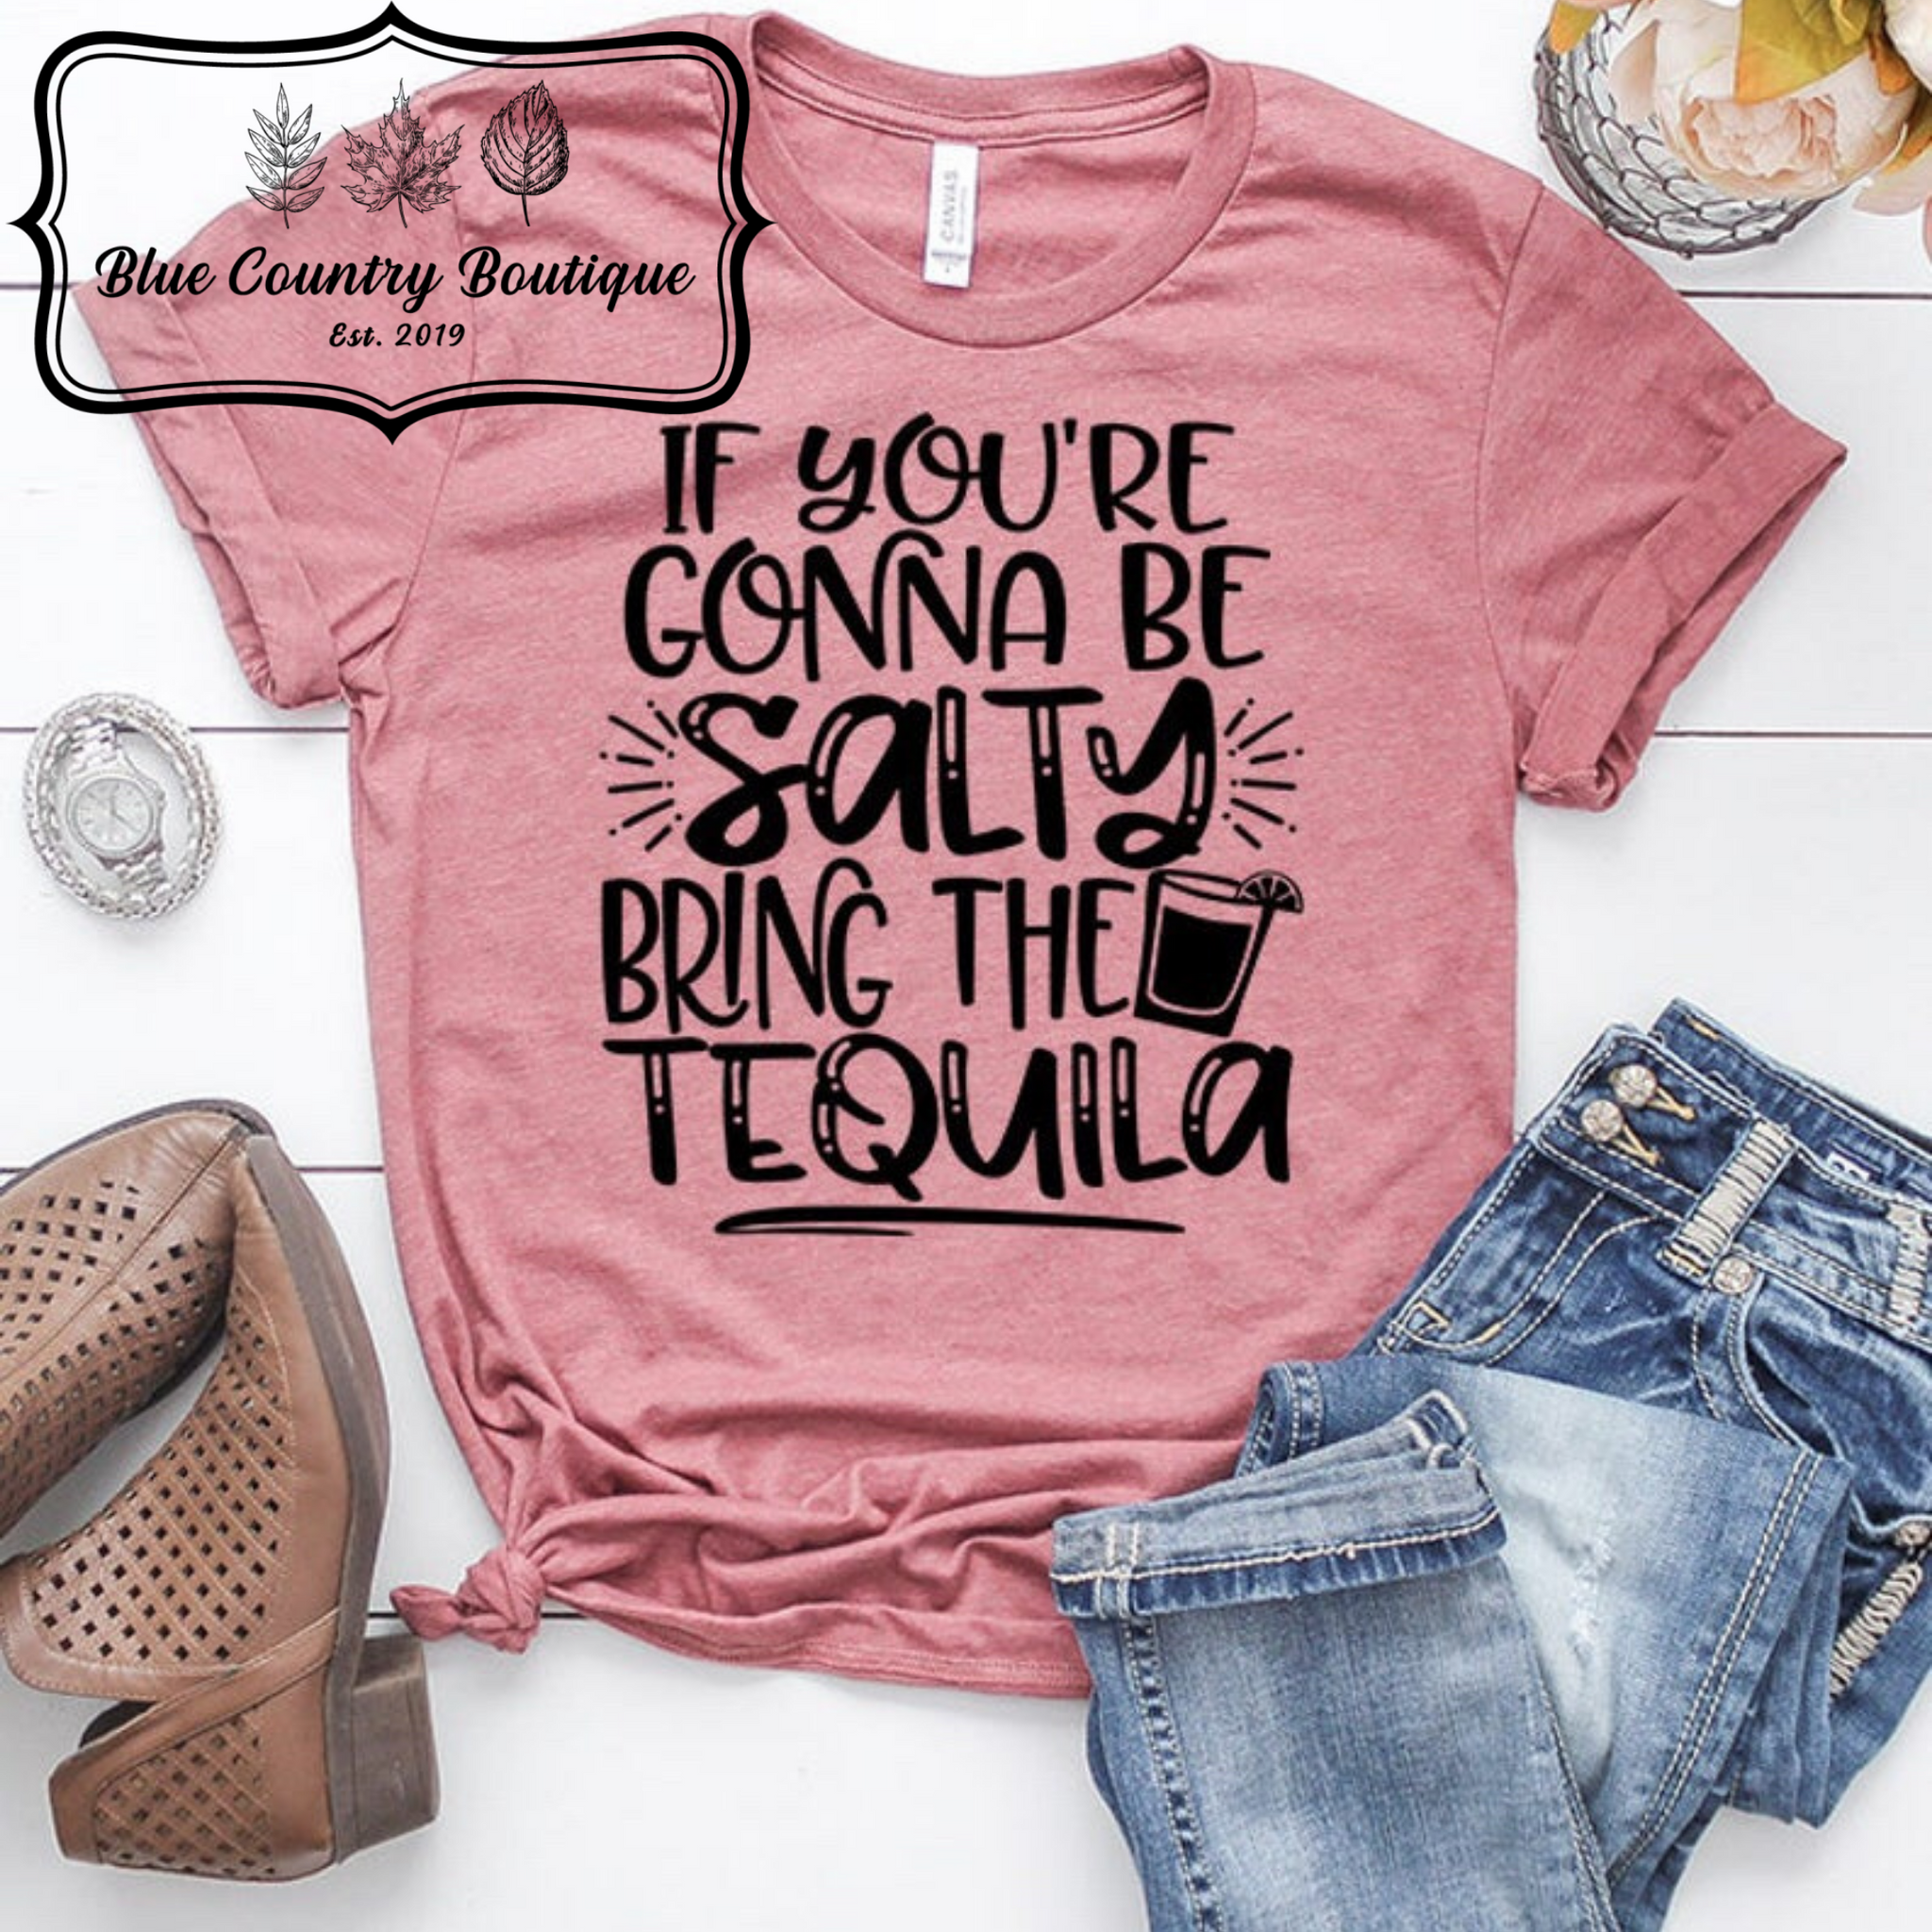 If Your Going To Be Salty Bring The Tequila